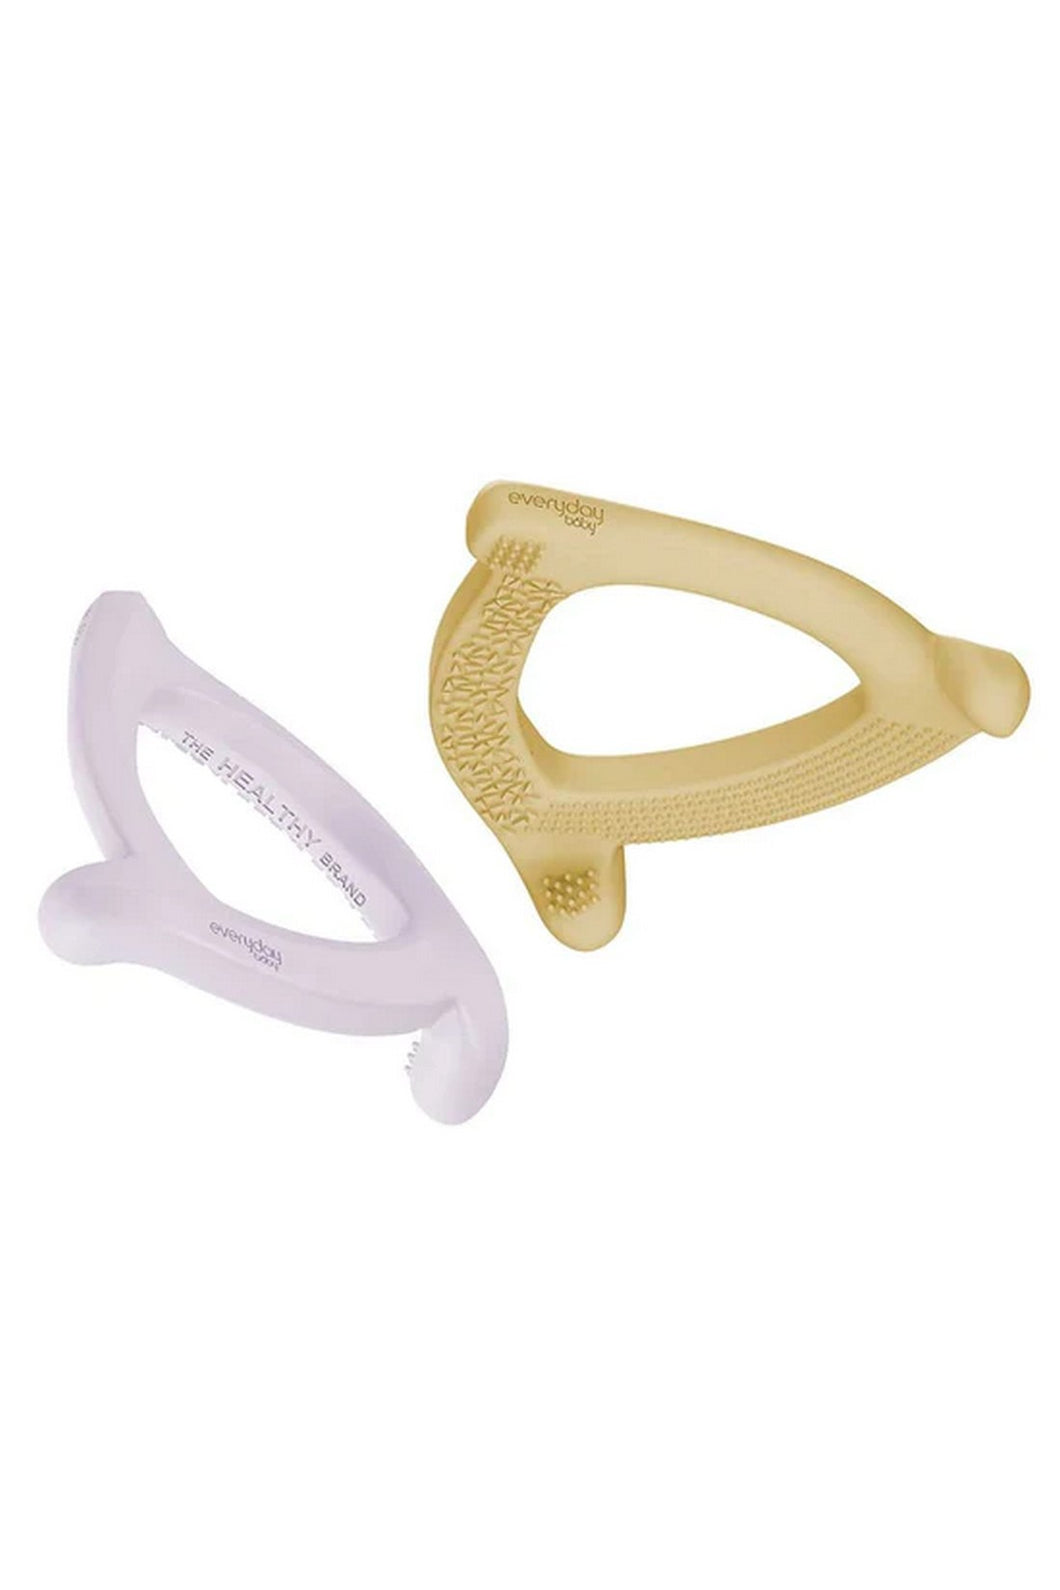 Everyday Baby Silicone Teether 2 Pack